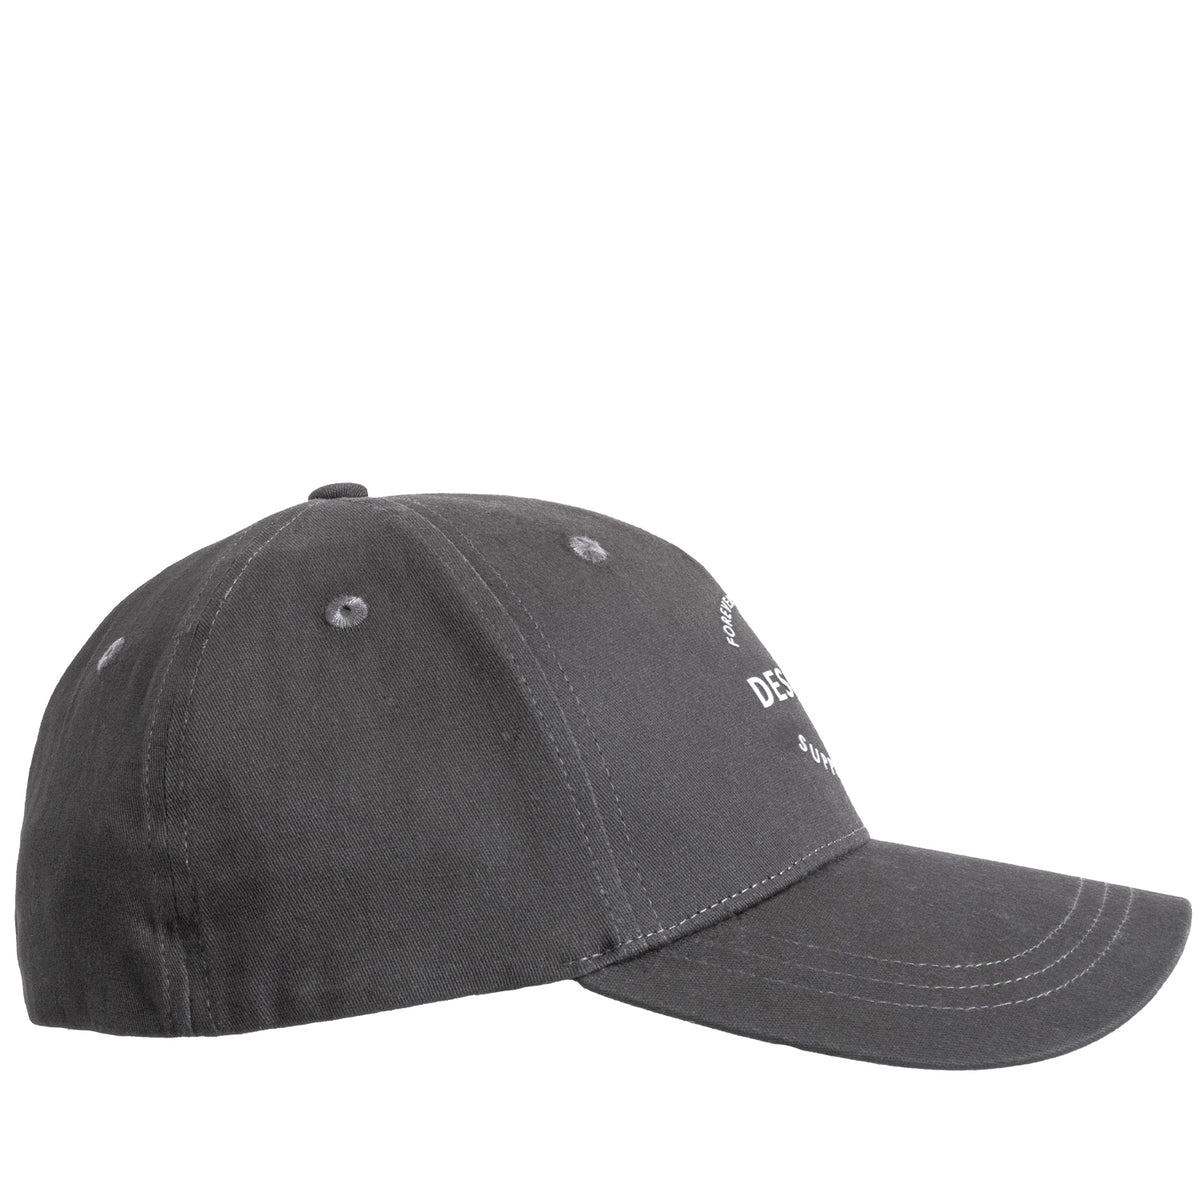 Desolve Supply Co, Forever Fishing Cap, 100% Poly Cotton